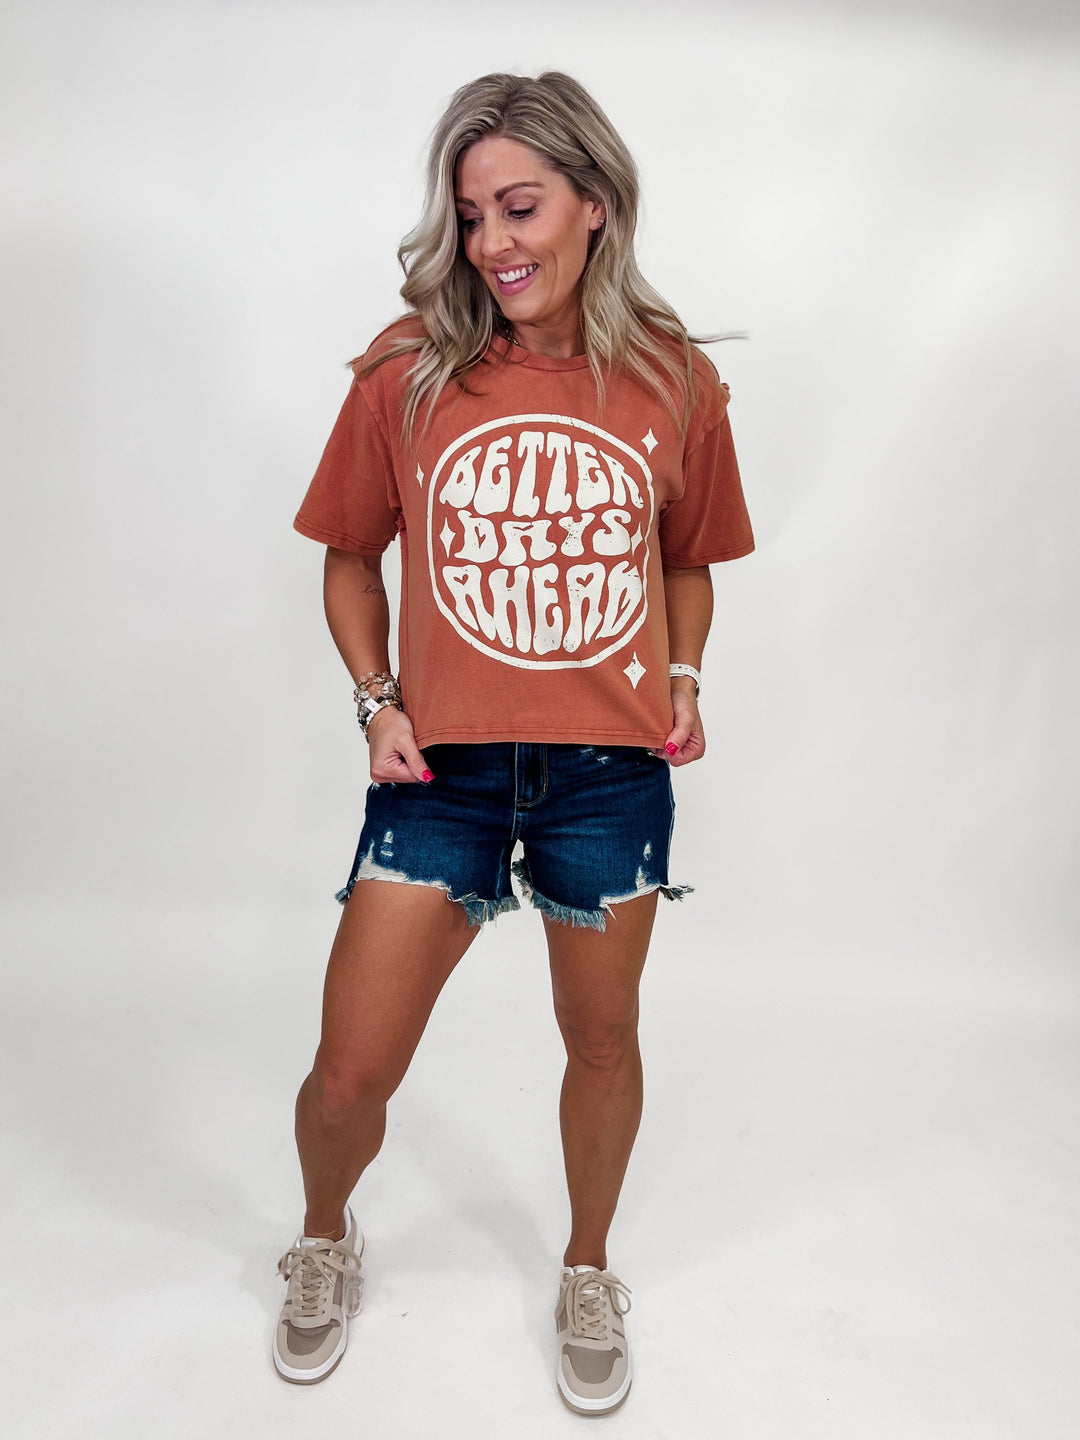 Better Days Ahead Graphic Tee, Rust